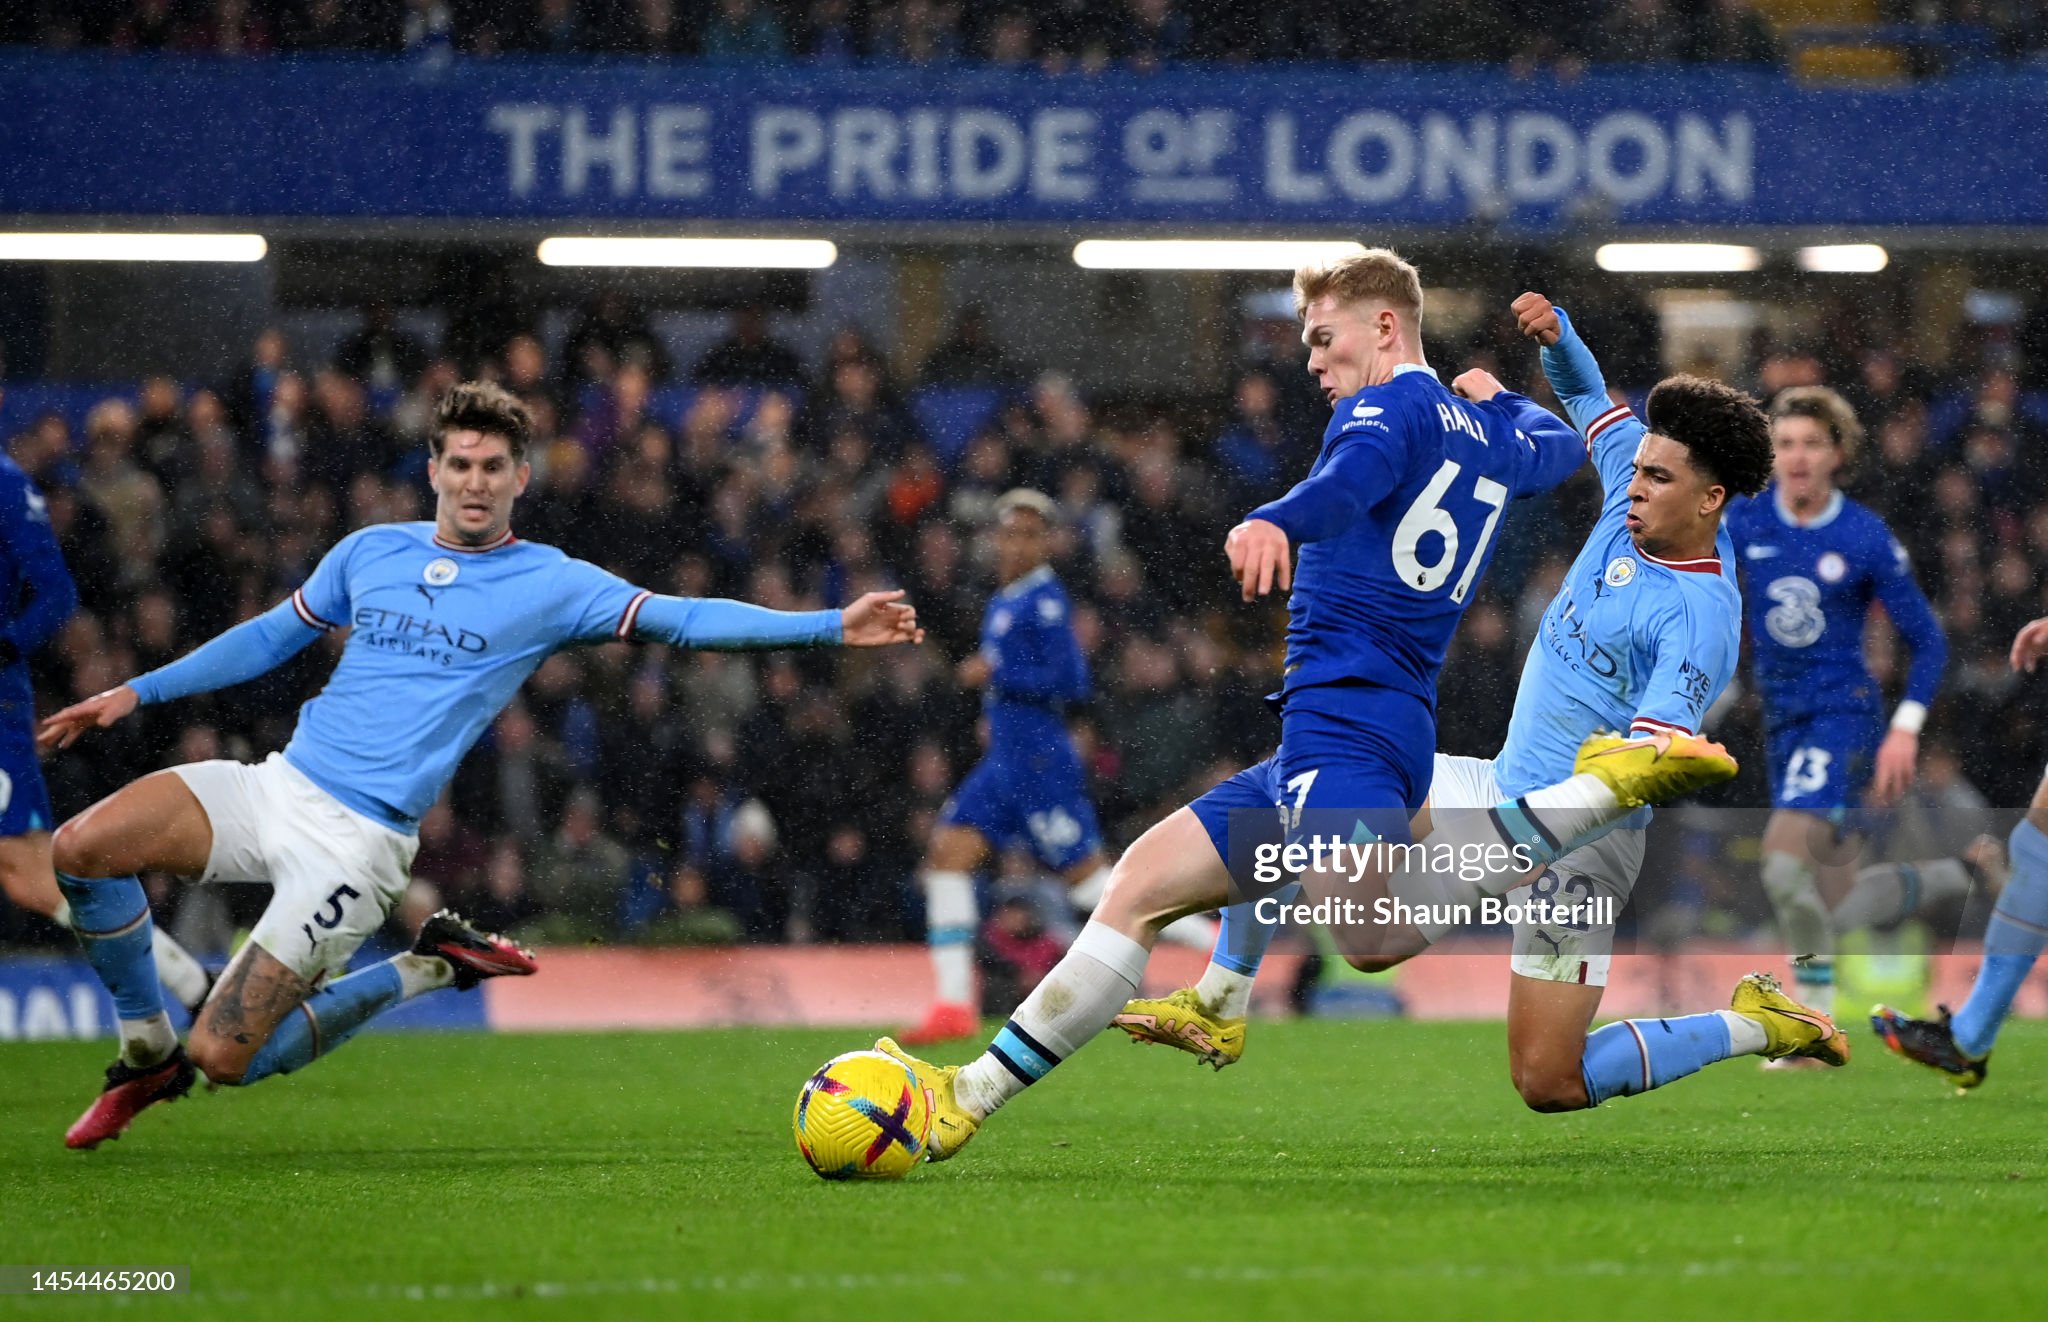 Manchester City vs Chelsea preview, prediction and odds